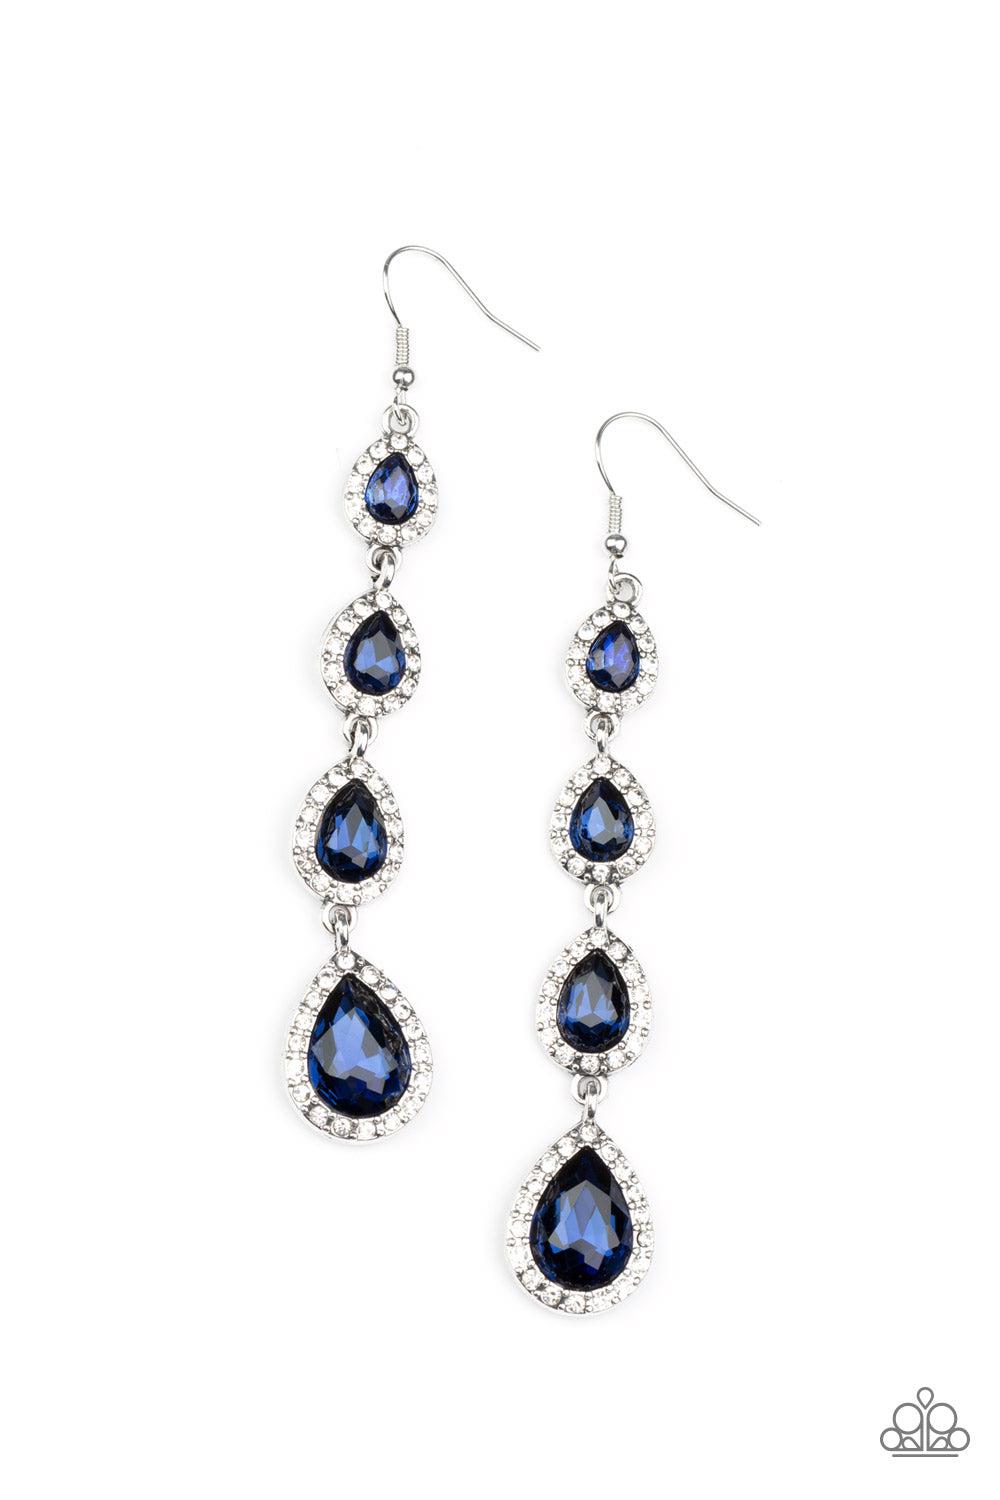 Confidently Classy Blue Rhinestone Earrings - Paparazzi Accessories- lightbox - CarasShop.com - $5 Jewelry by Cara Jewels